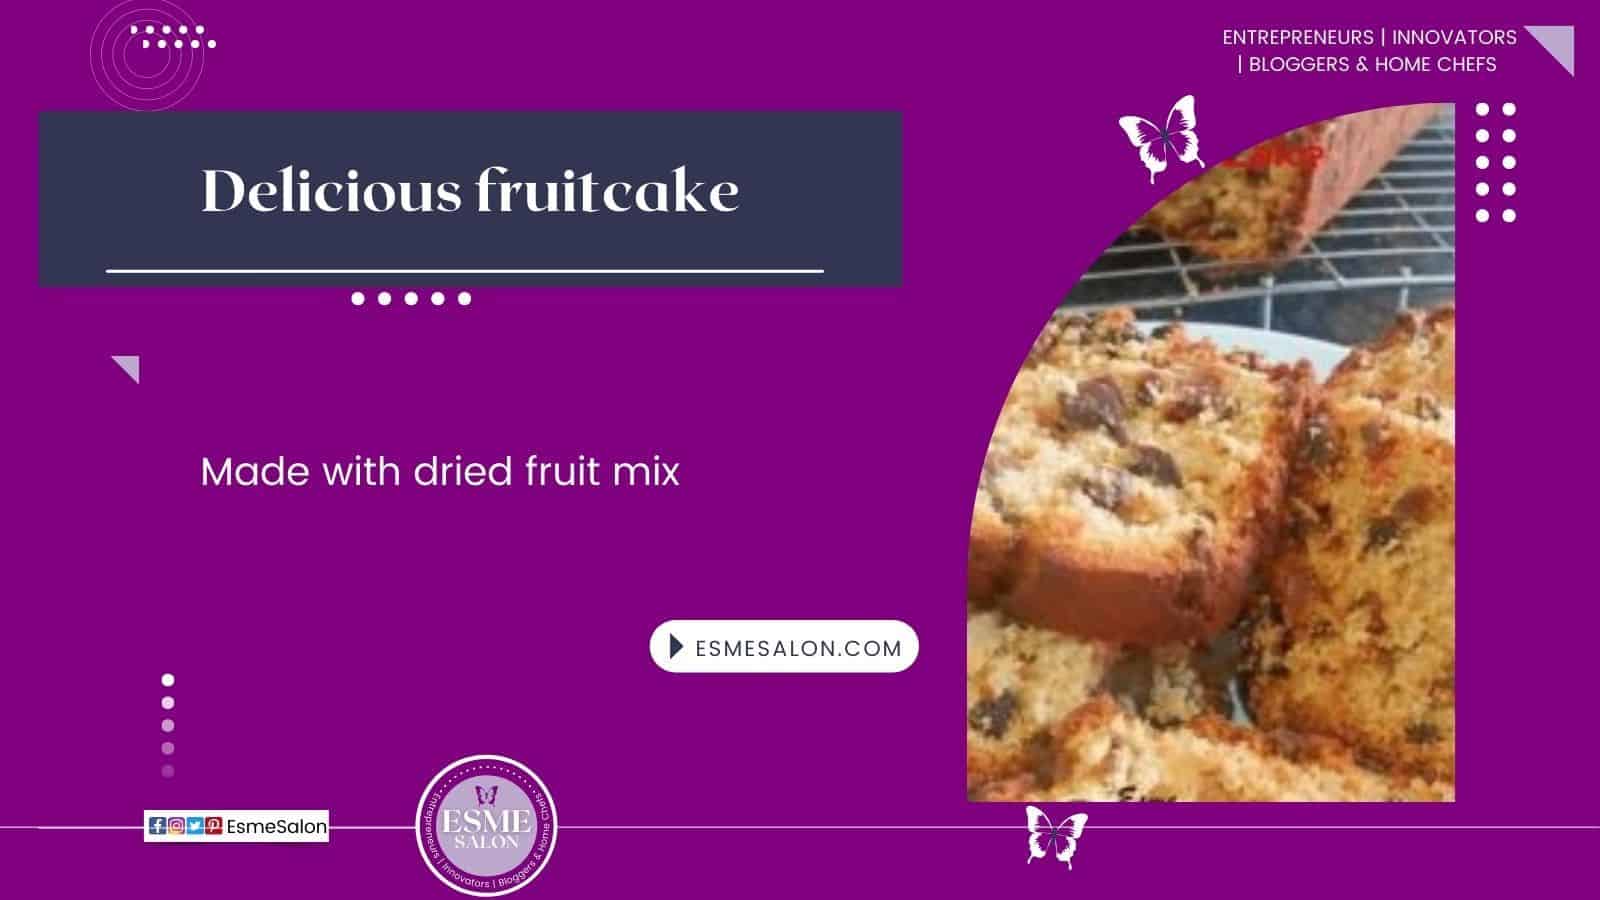 An image of slices of Delicious fruitcake made with dried fruit